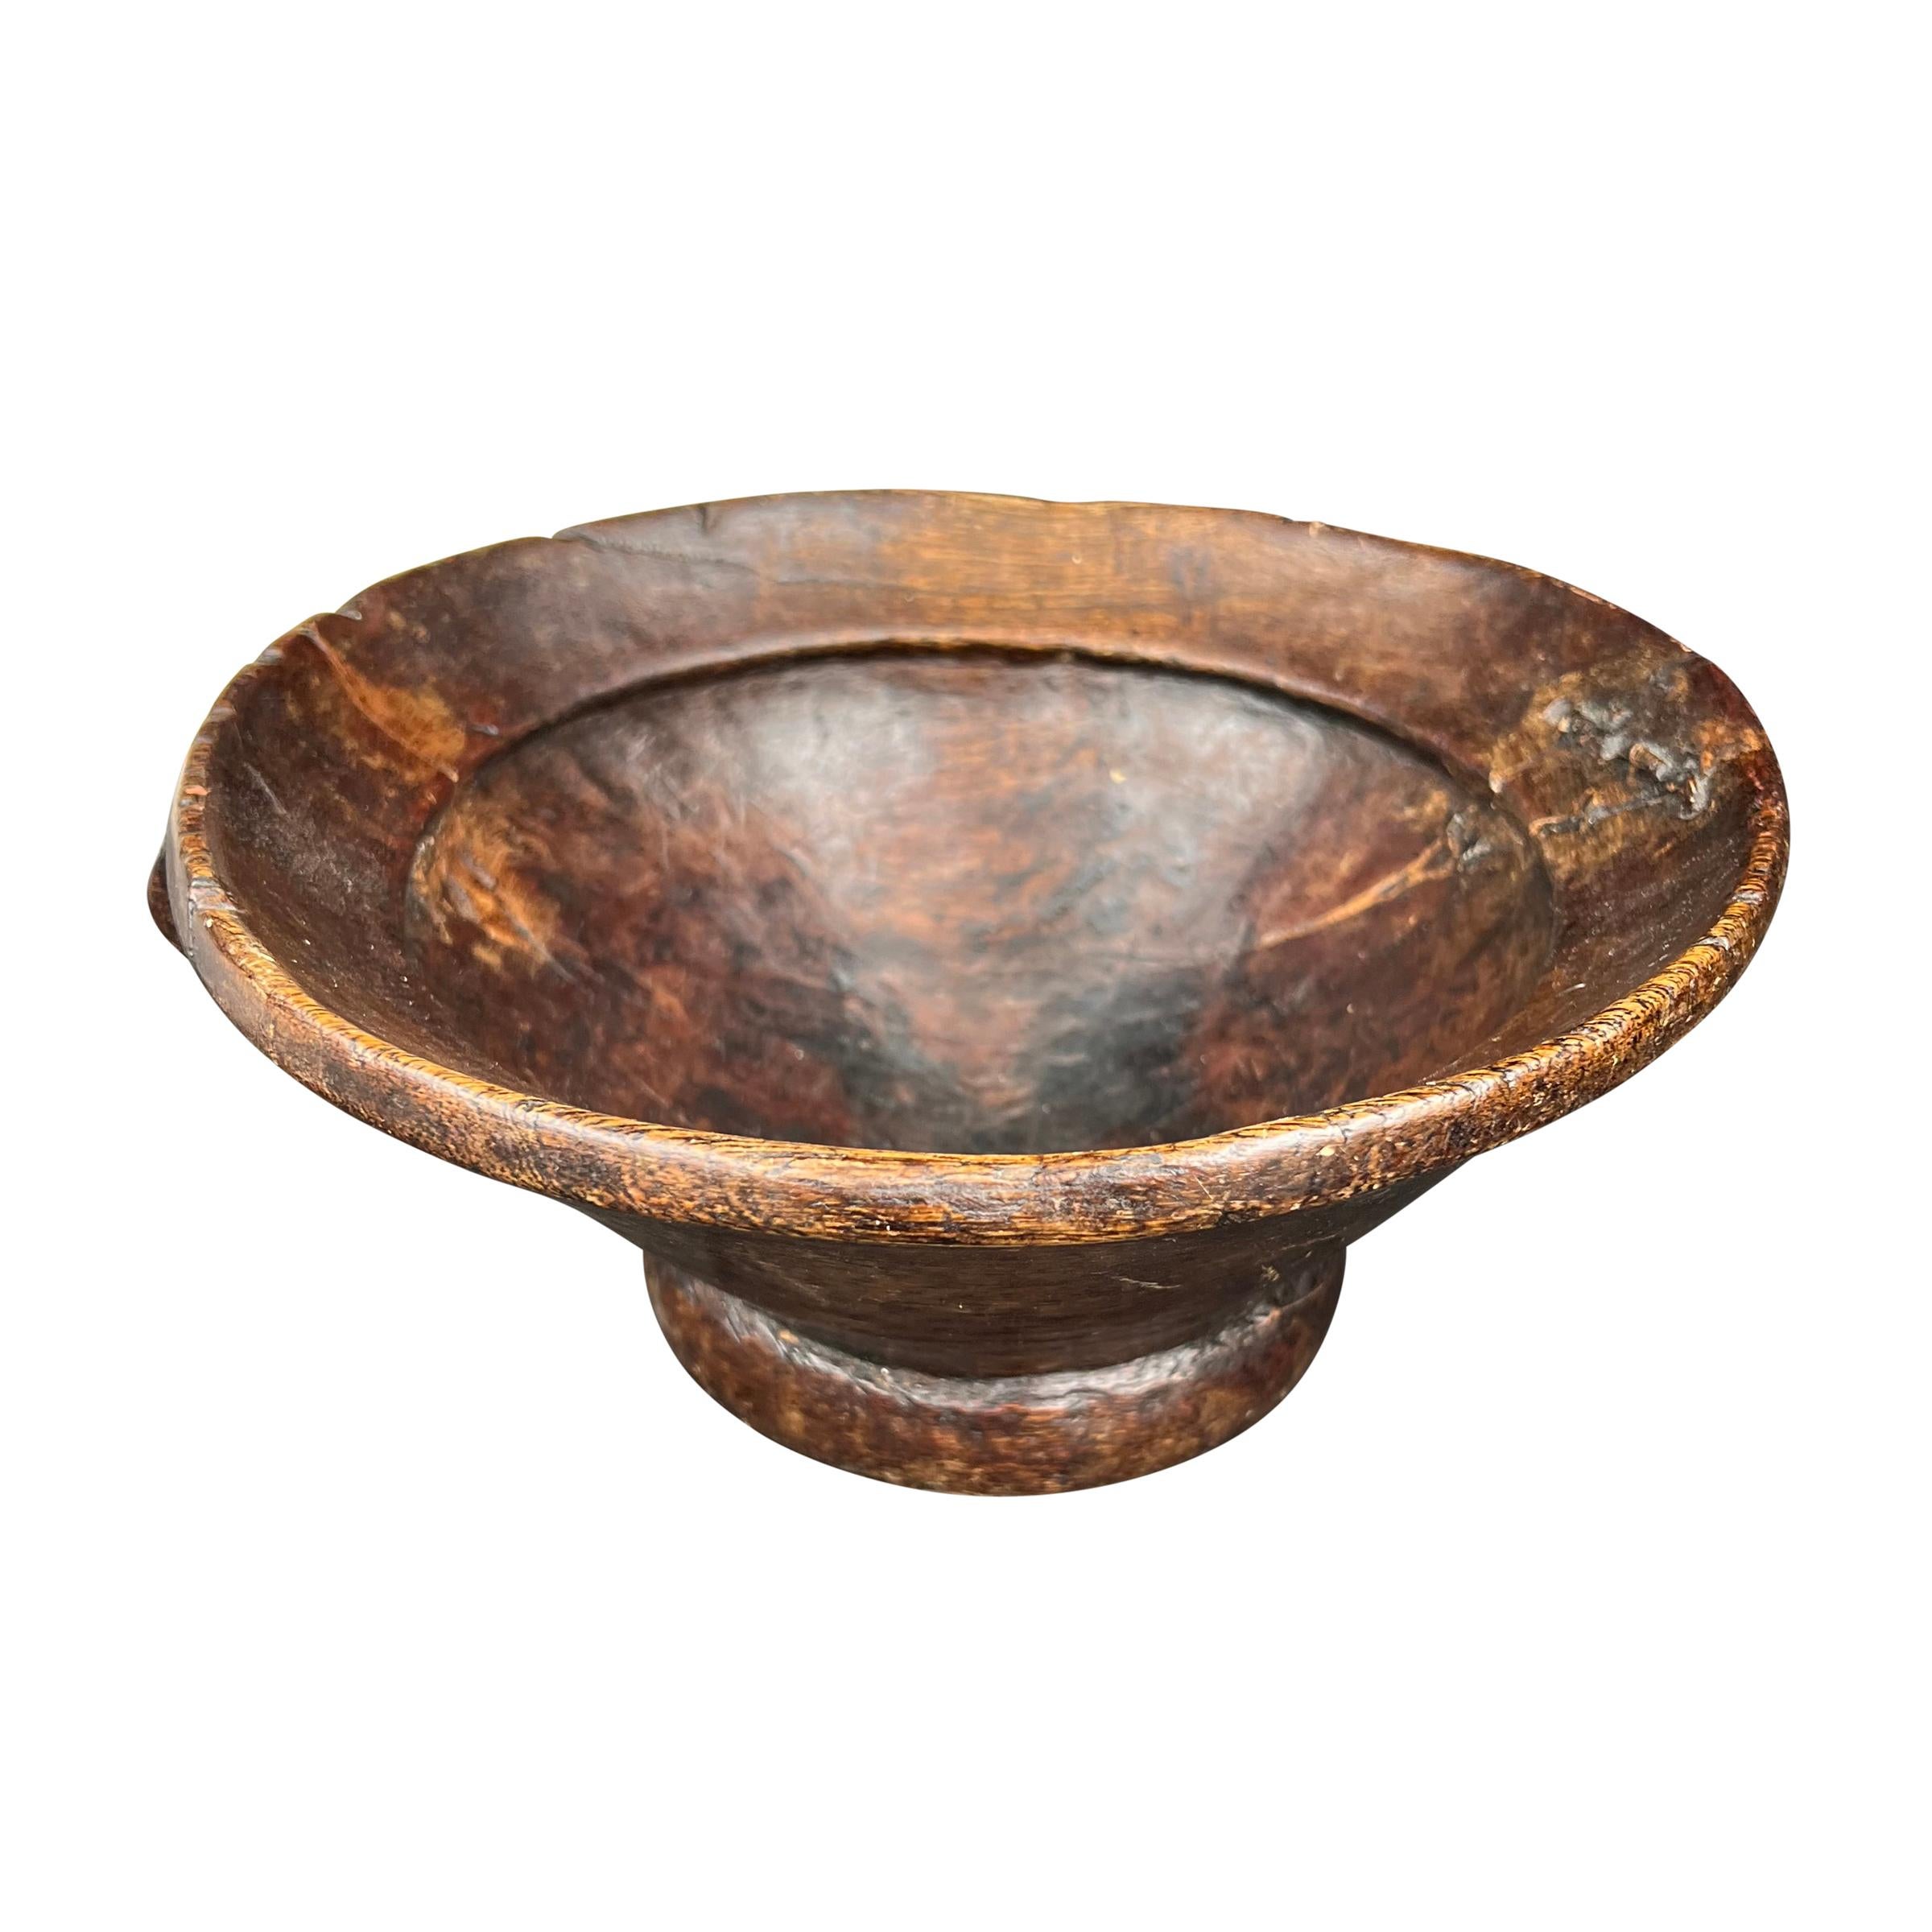 Hand-Carved 19th Century Wooden Bowl